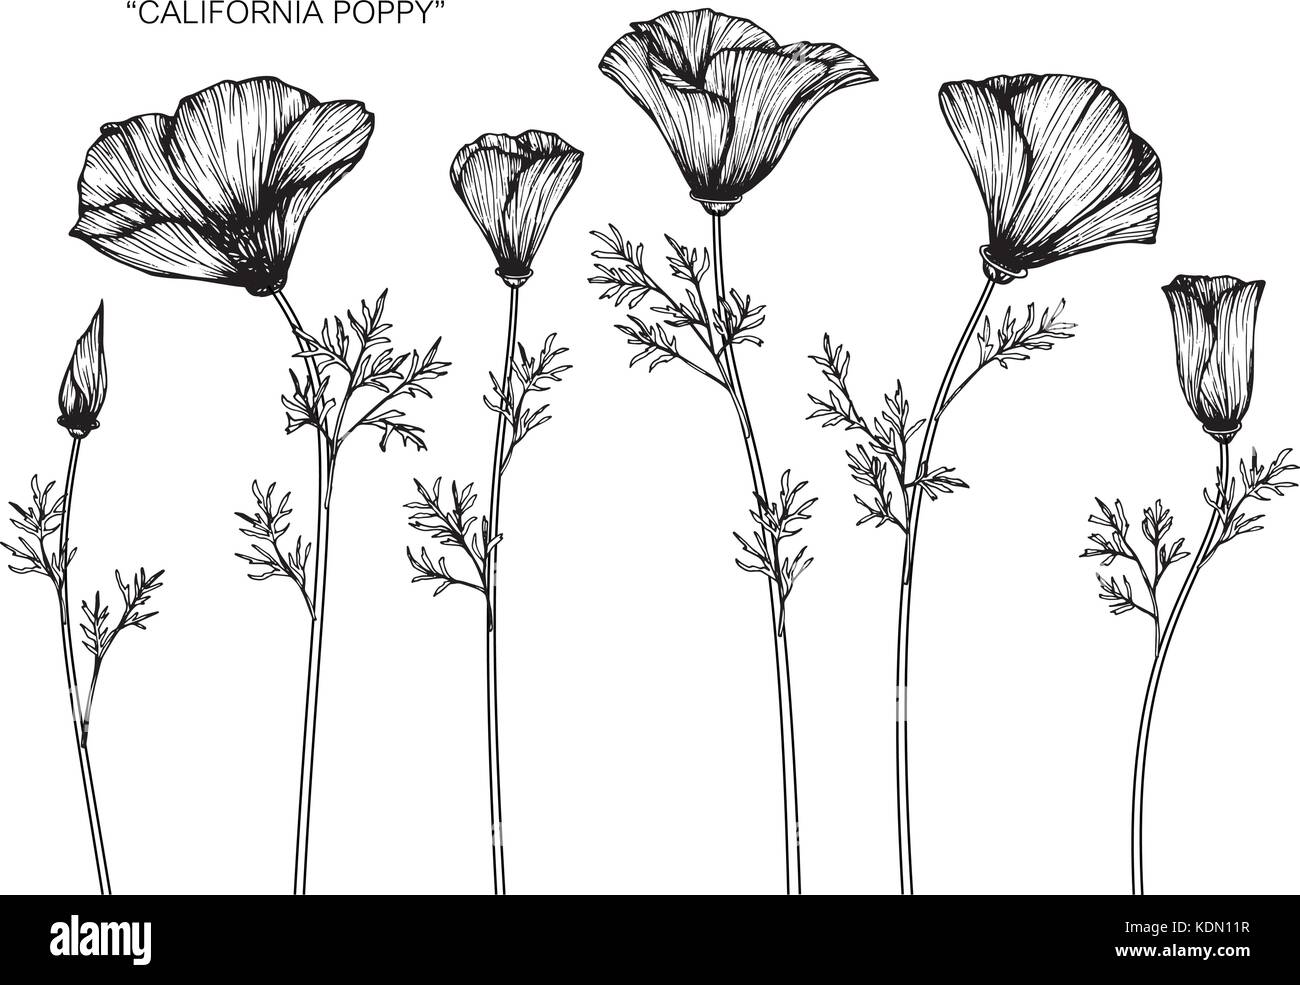 You searched for california poppy flower drawing illustration